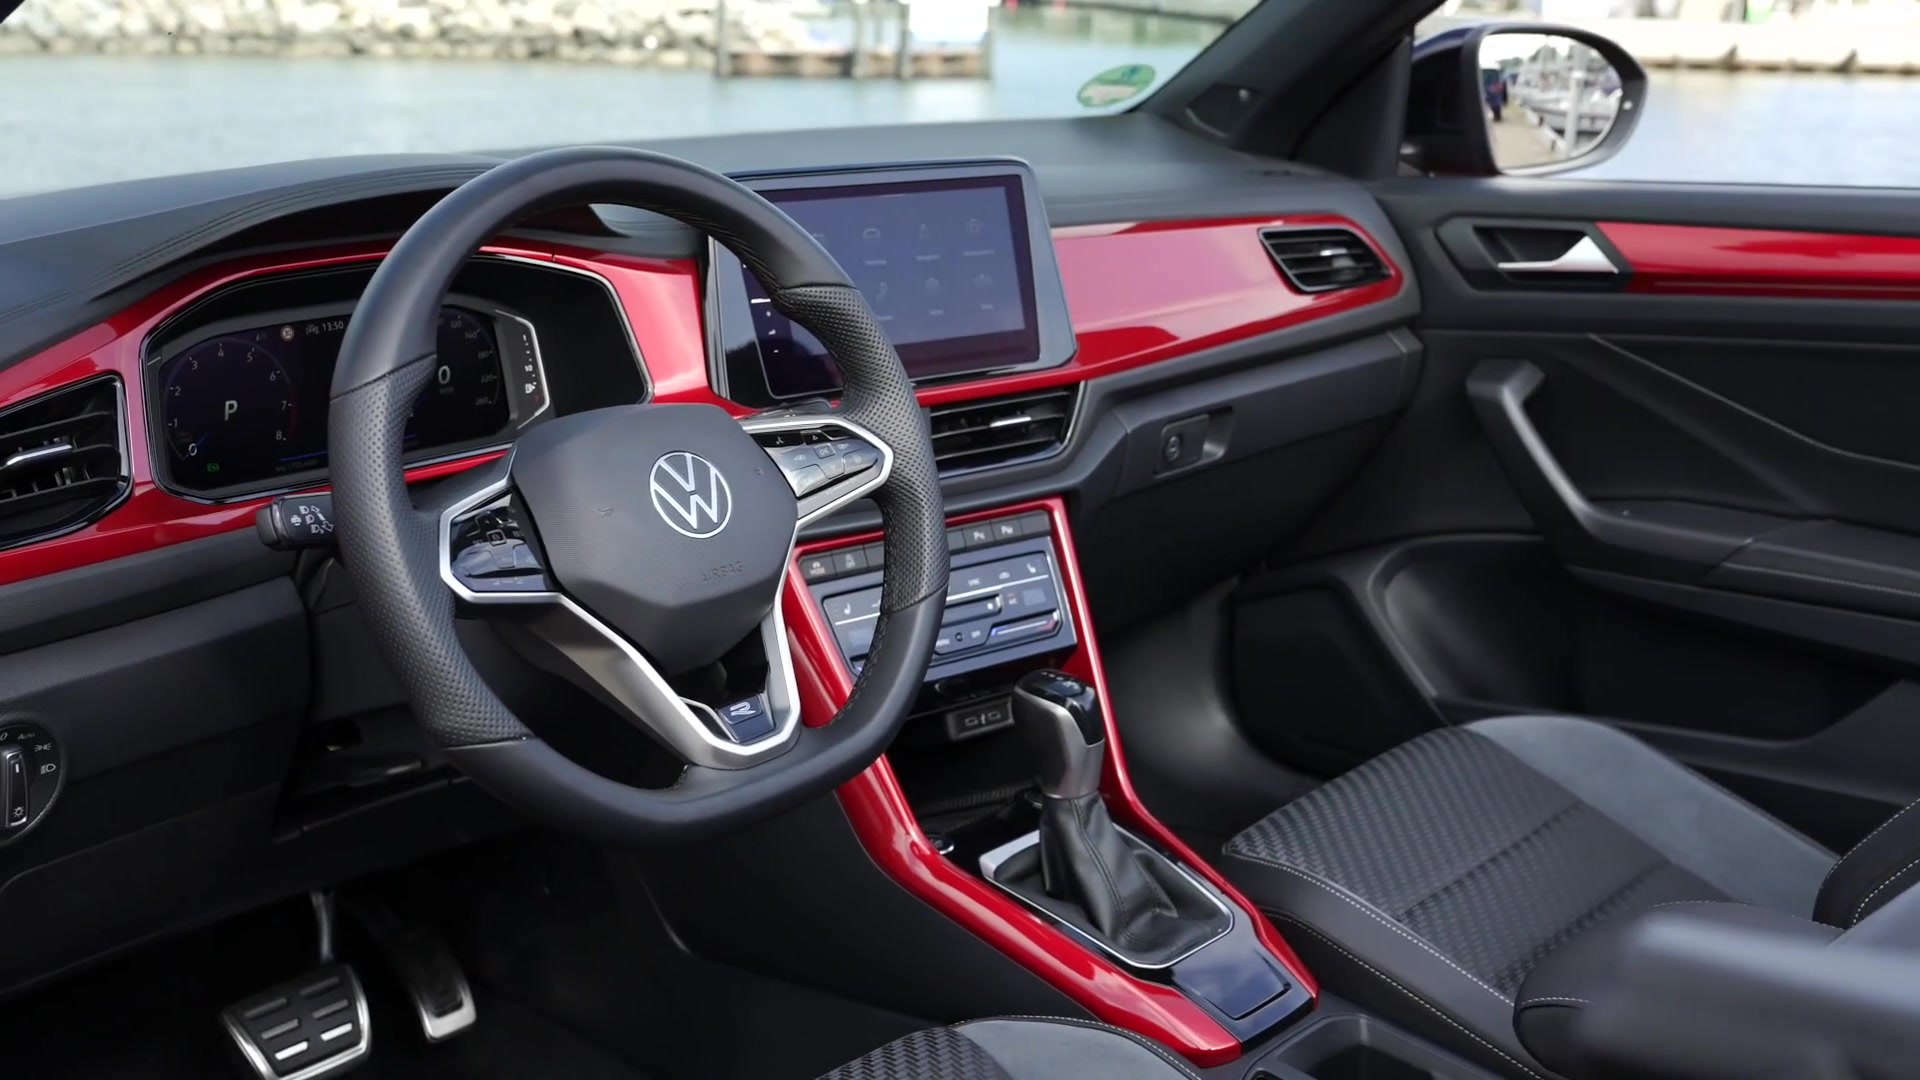 The new Volkswagen T-Roc Coupe Interior Design - video Dailymotion